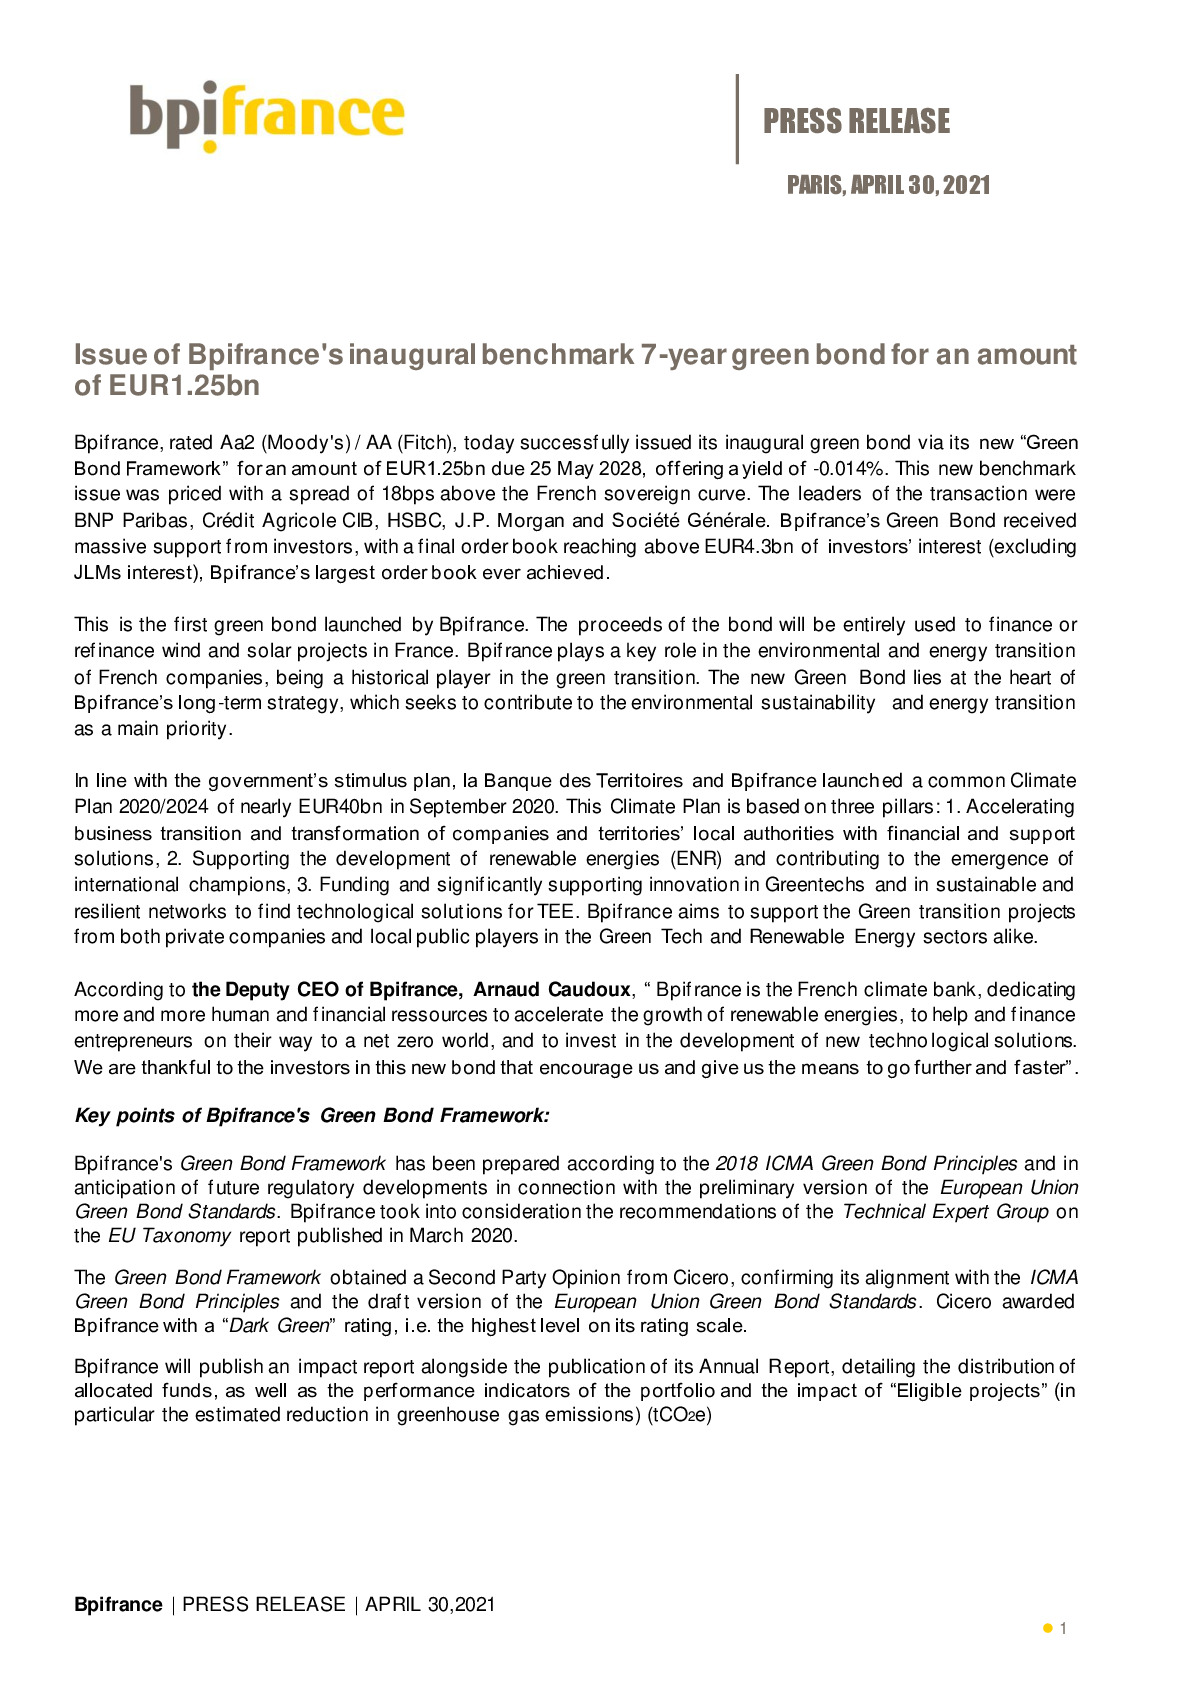 2020 04 30 – PR Bpifrance – Issue of Bpifrances inaugural benchmark 7-year green bond for an amount of EUR1-25bn-pdf